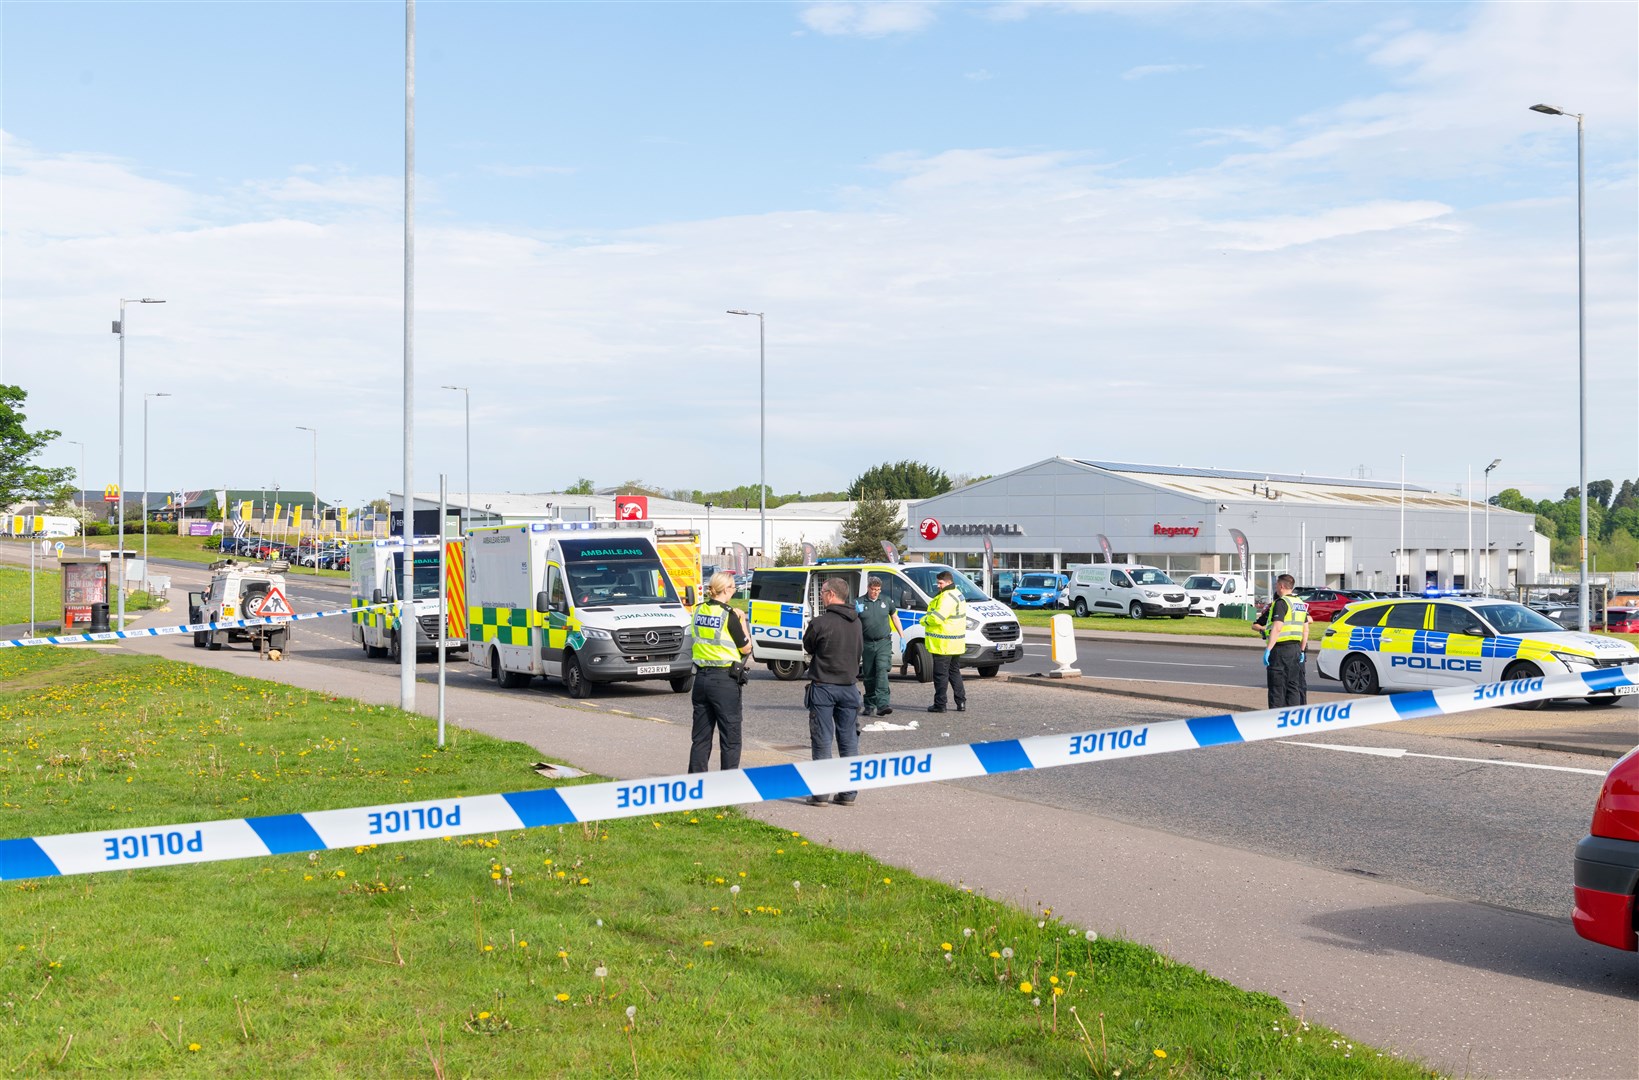 Emergency services on the A96 in Elgin between East Road and Reiket Lane roundabout early on Friday, May 10.